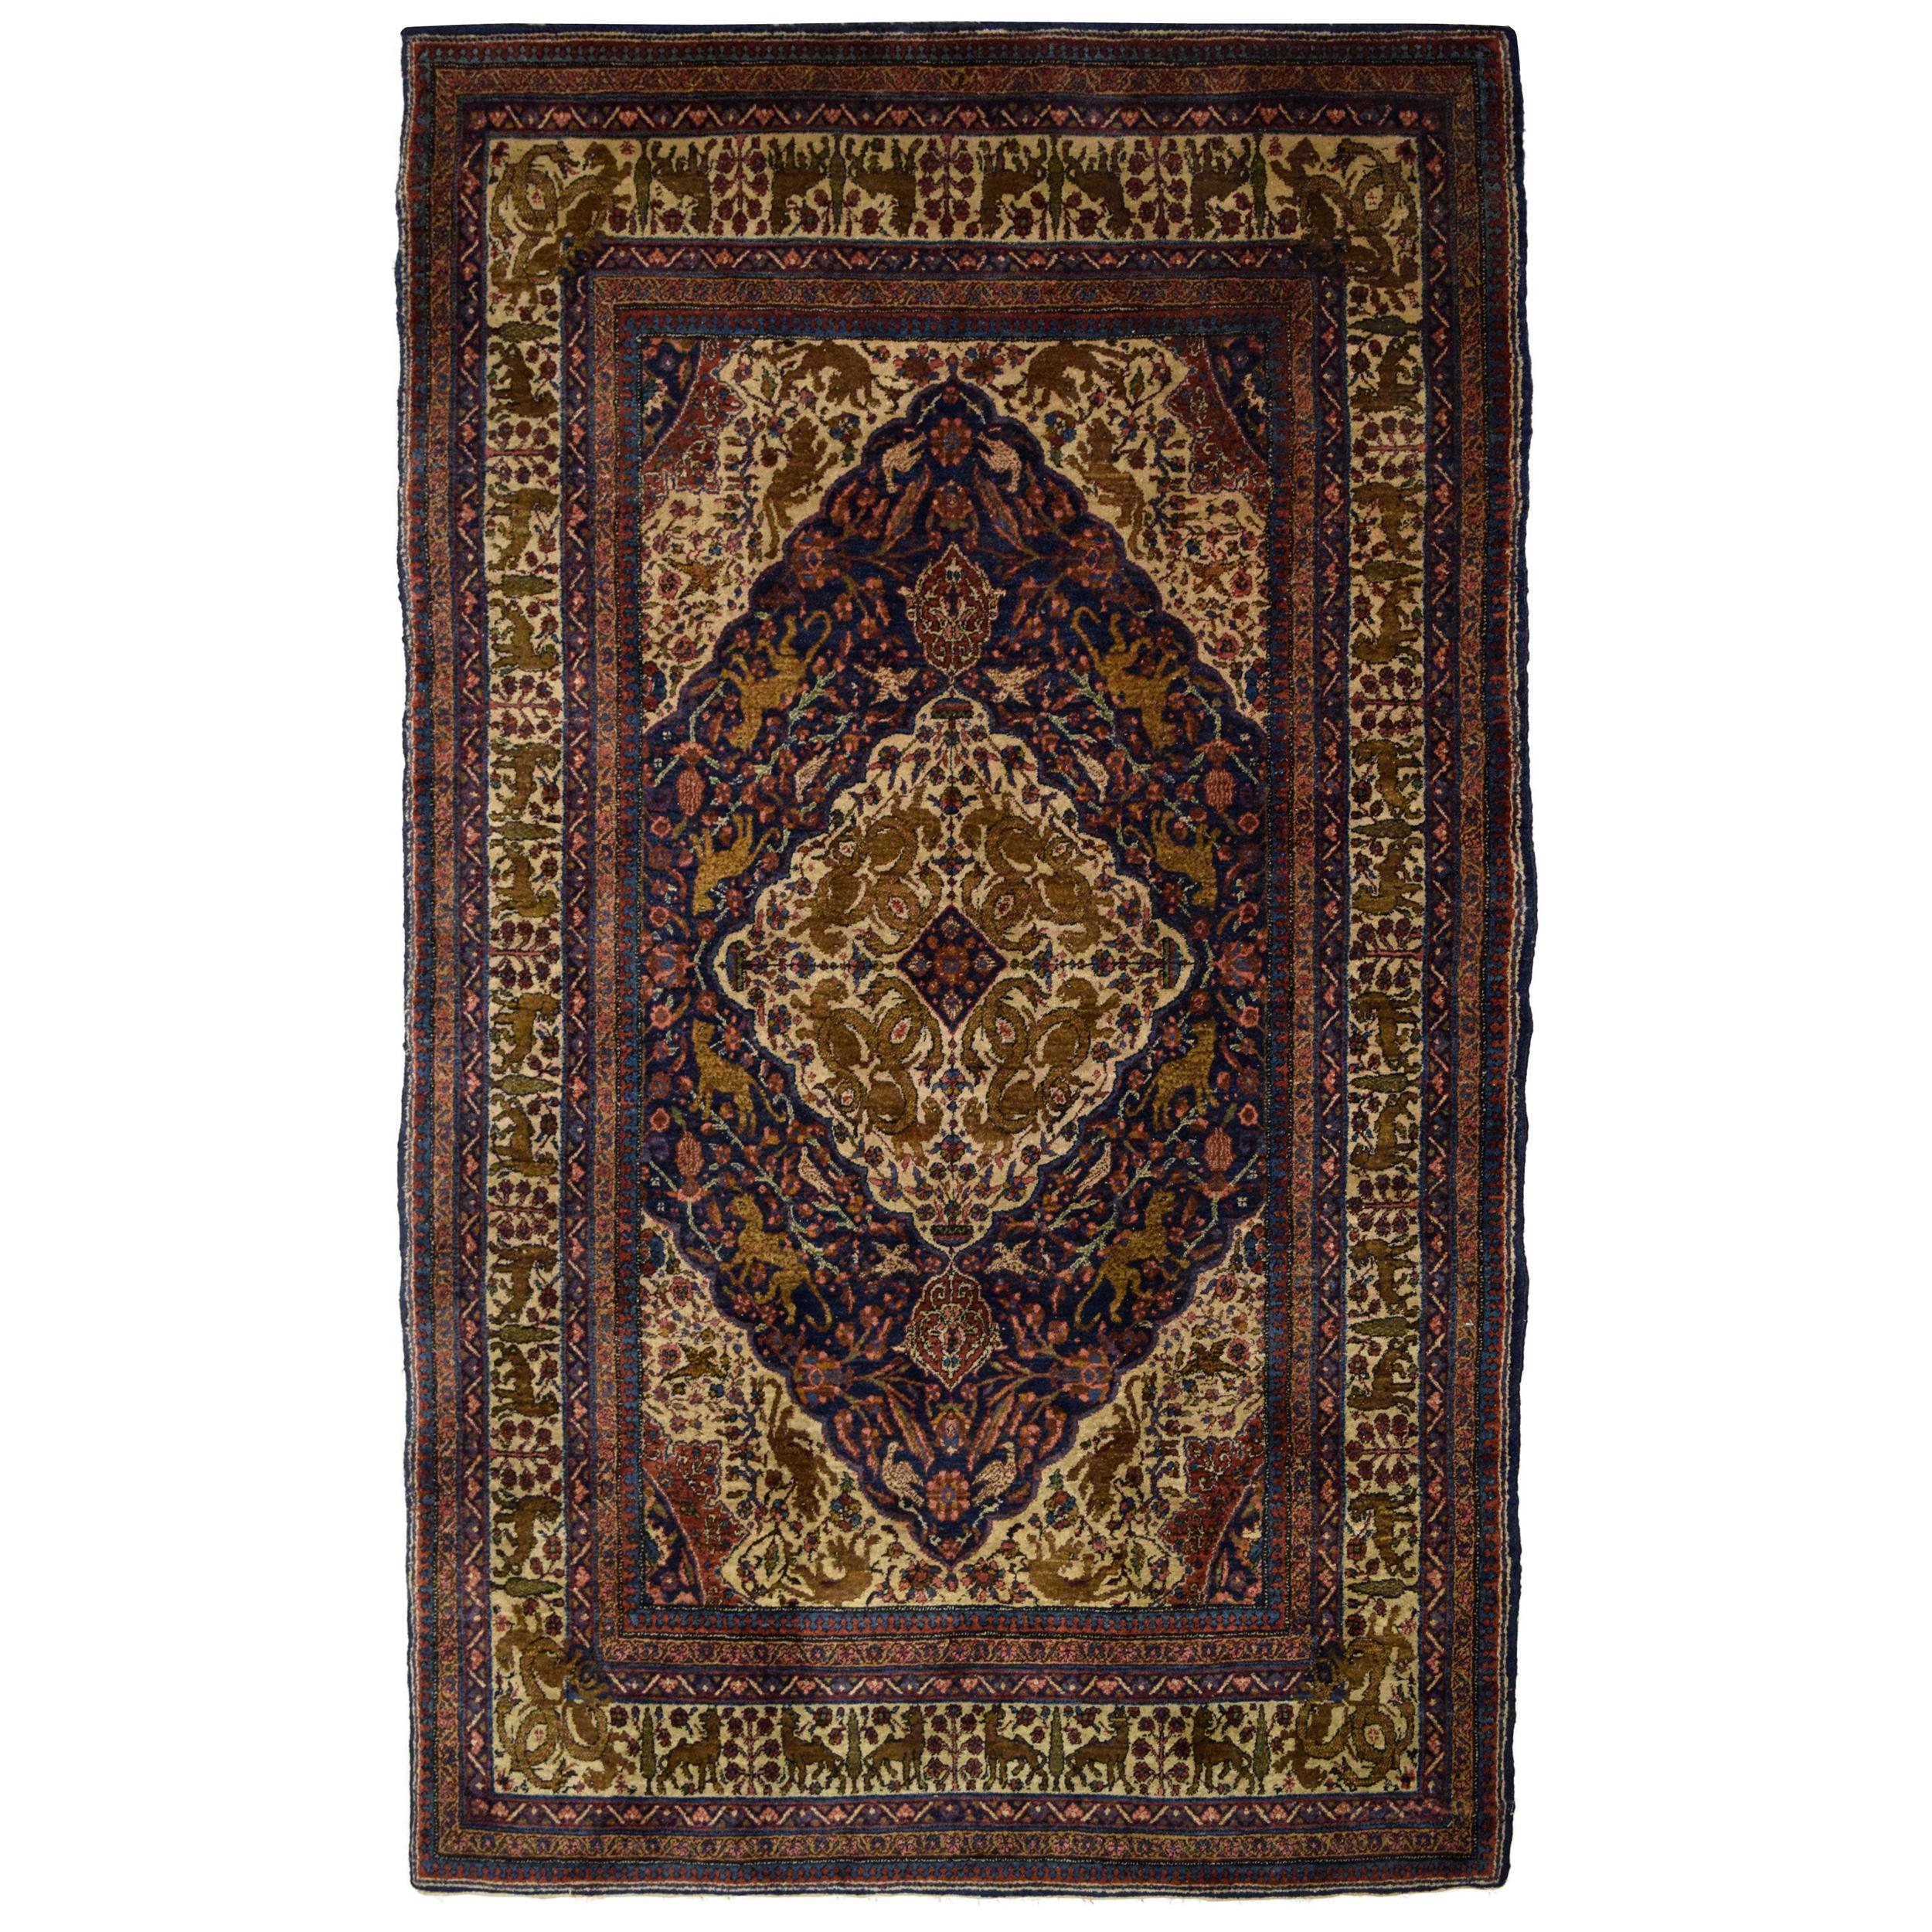 Antique 1900s Wool Persian Khoy Rug in Cream, Green, and Indigo, 5' x 8' For Sale